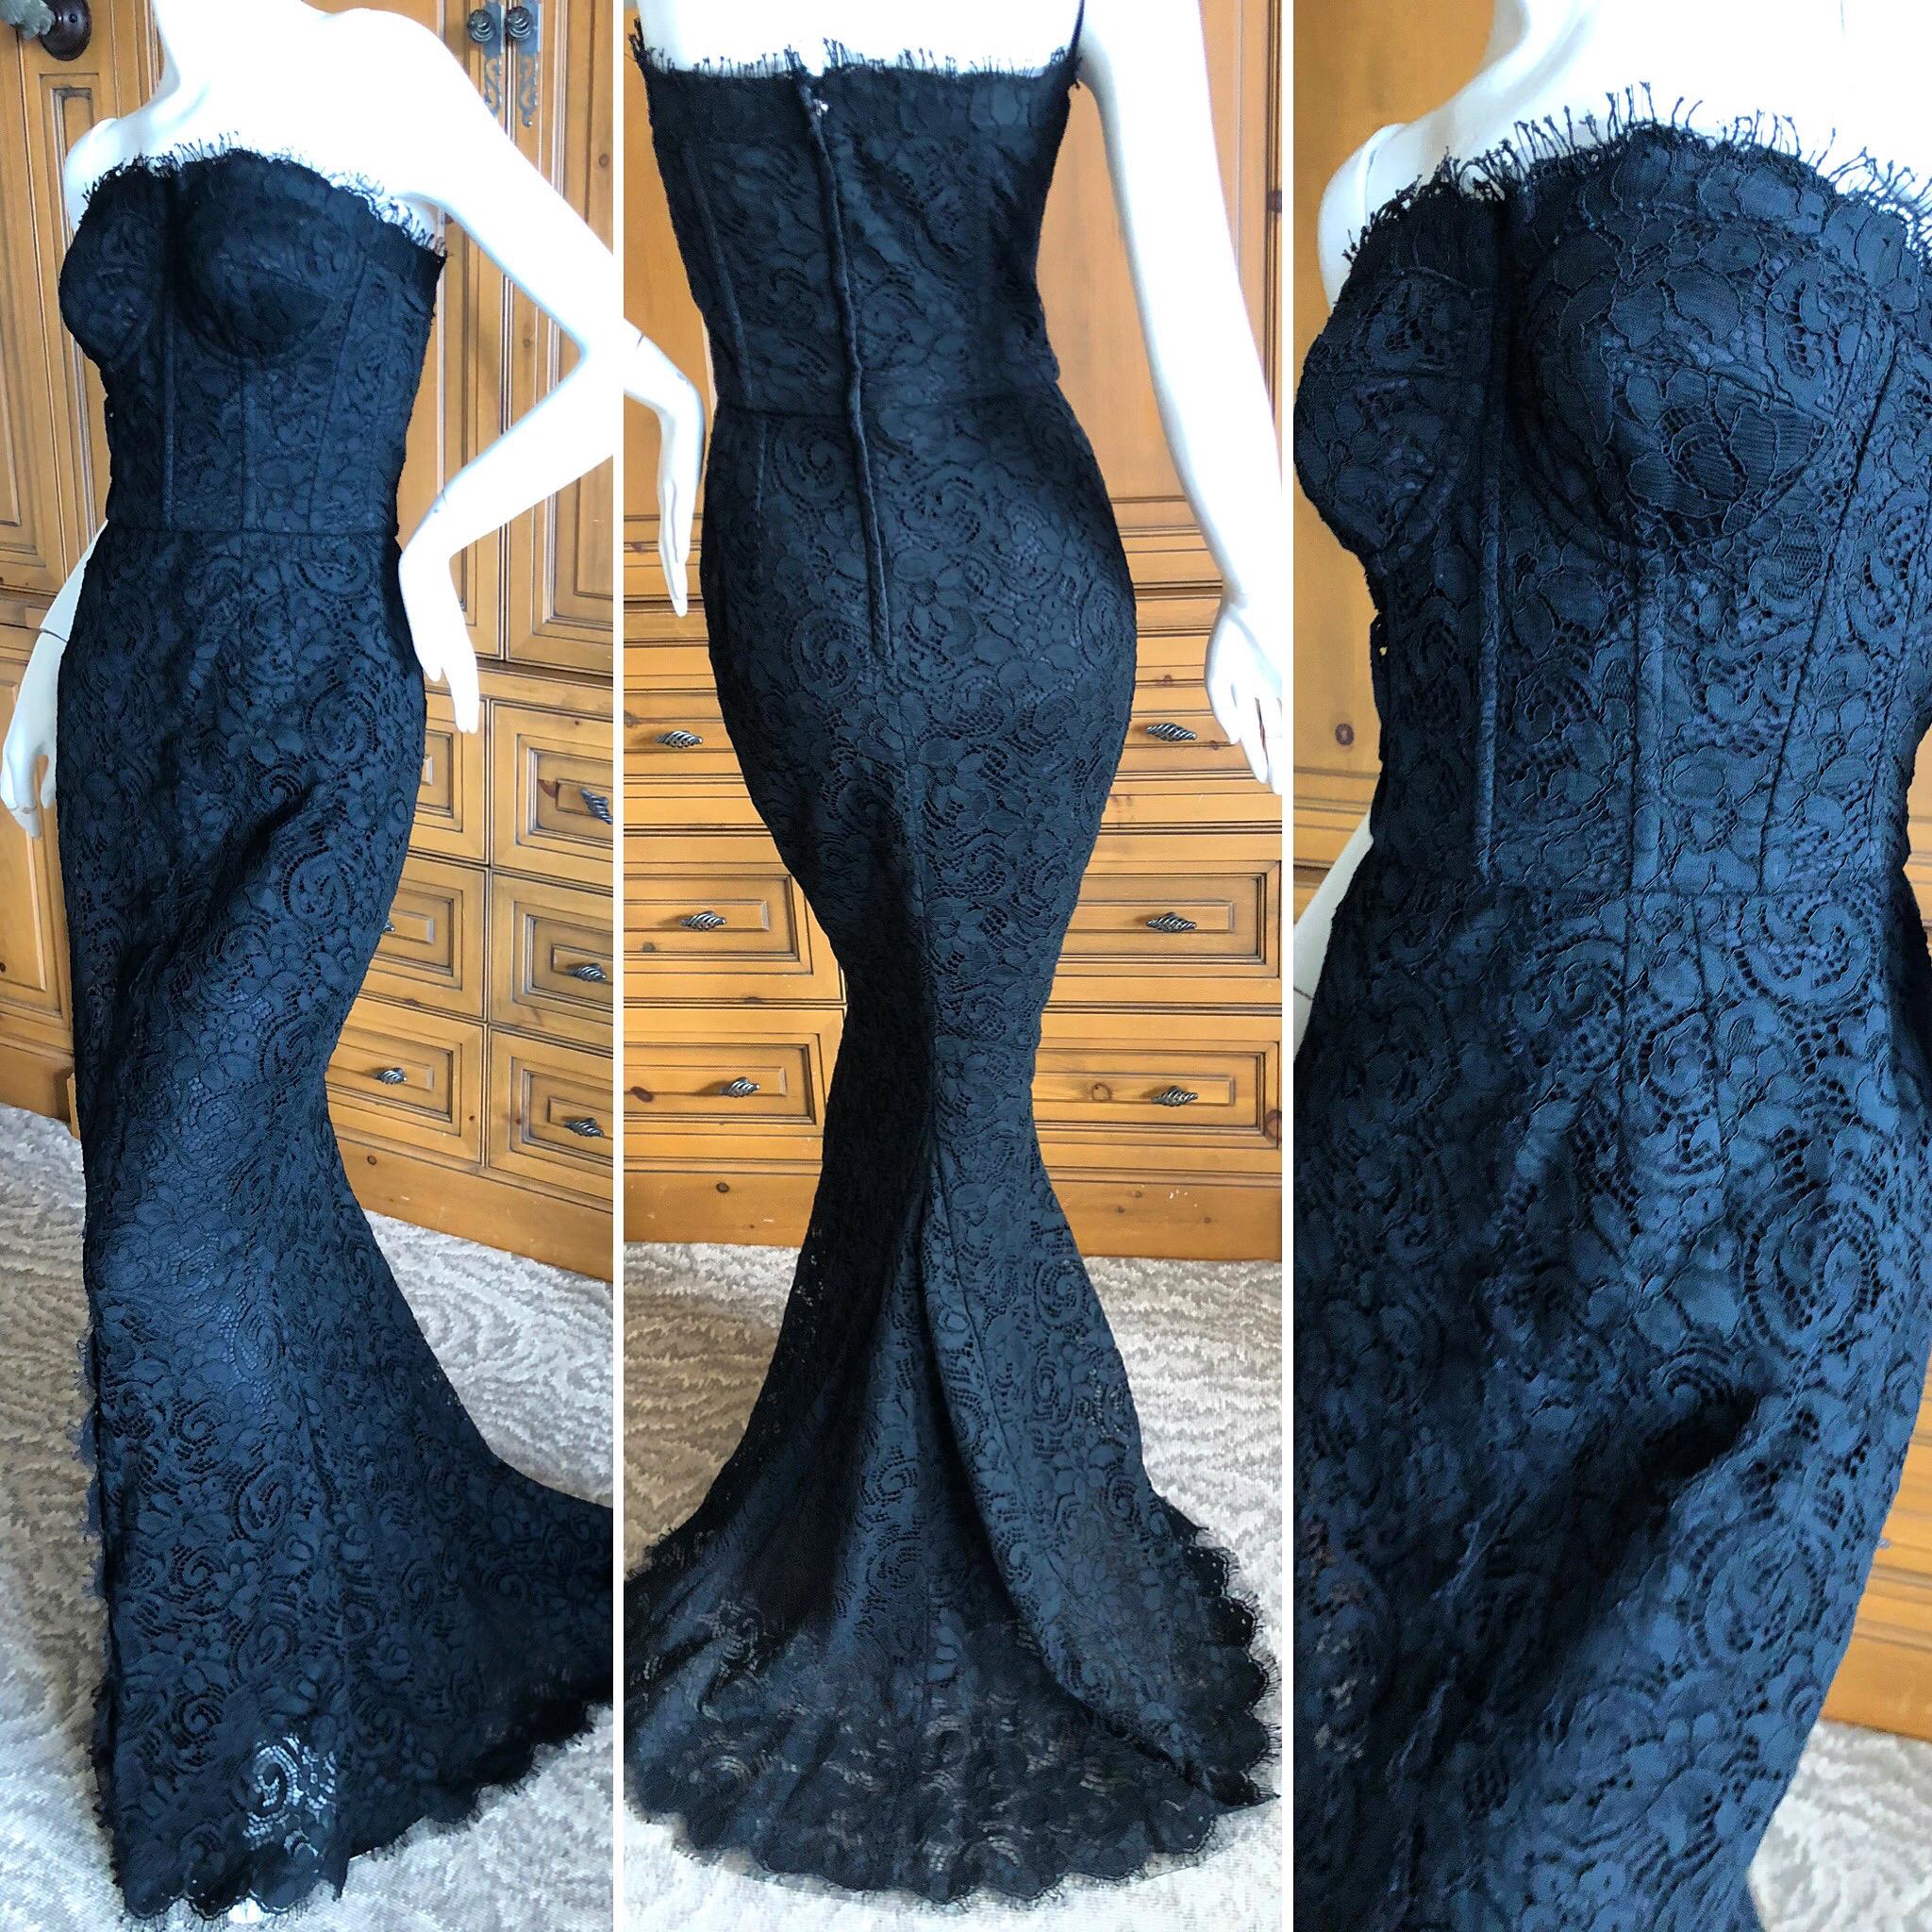 .Dolce & Gabbana Vintage Black Lace Corseted Strapless Evening Gown with Small Train.
There is a full corset. Zips up the back
This is so wonderful, so sexy. the photos don't do it justice.
Size 40
 Bust 34